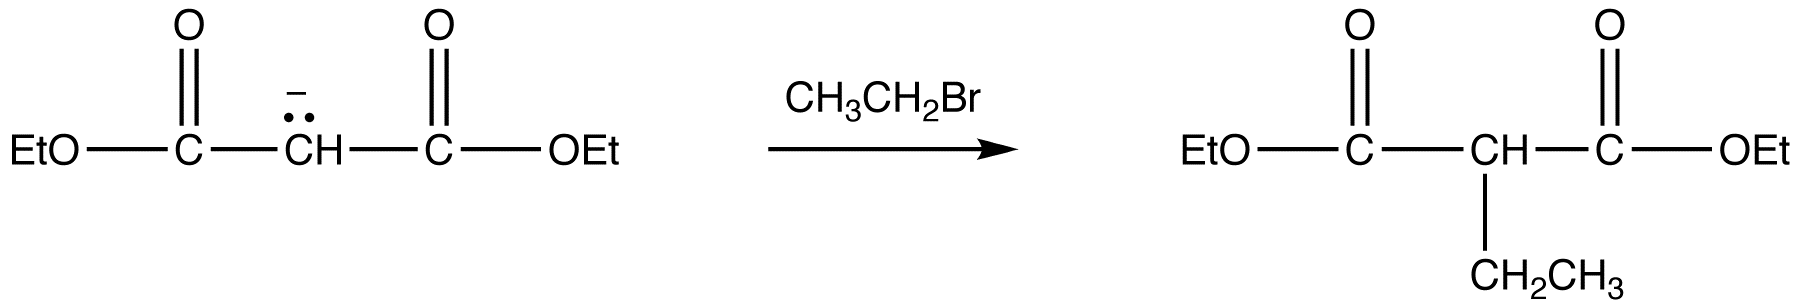 malonicestersynthesis13.png